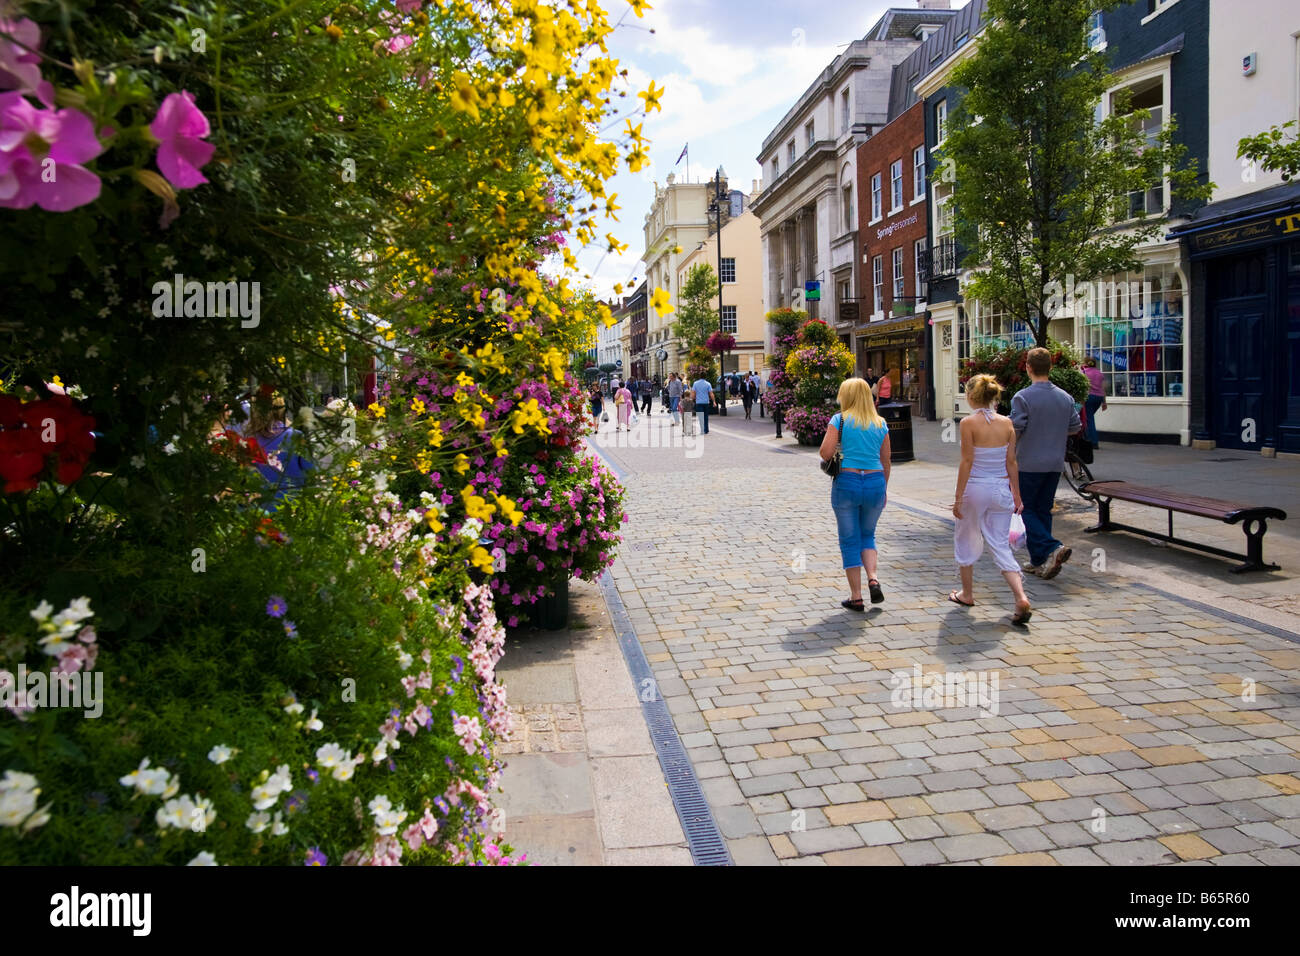 Doncaster High Street South Yorkshire England UK Stockfoto